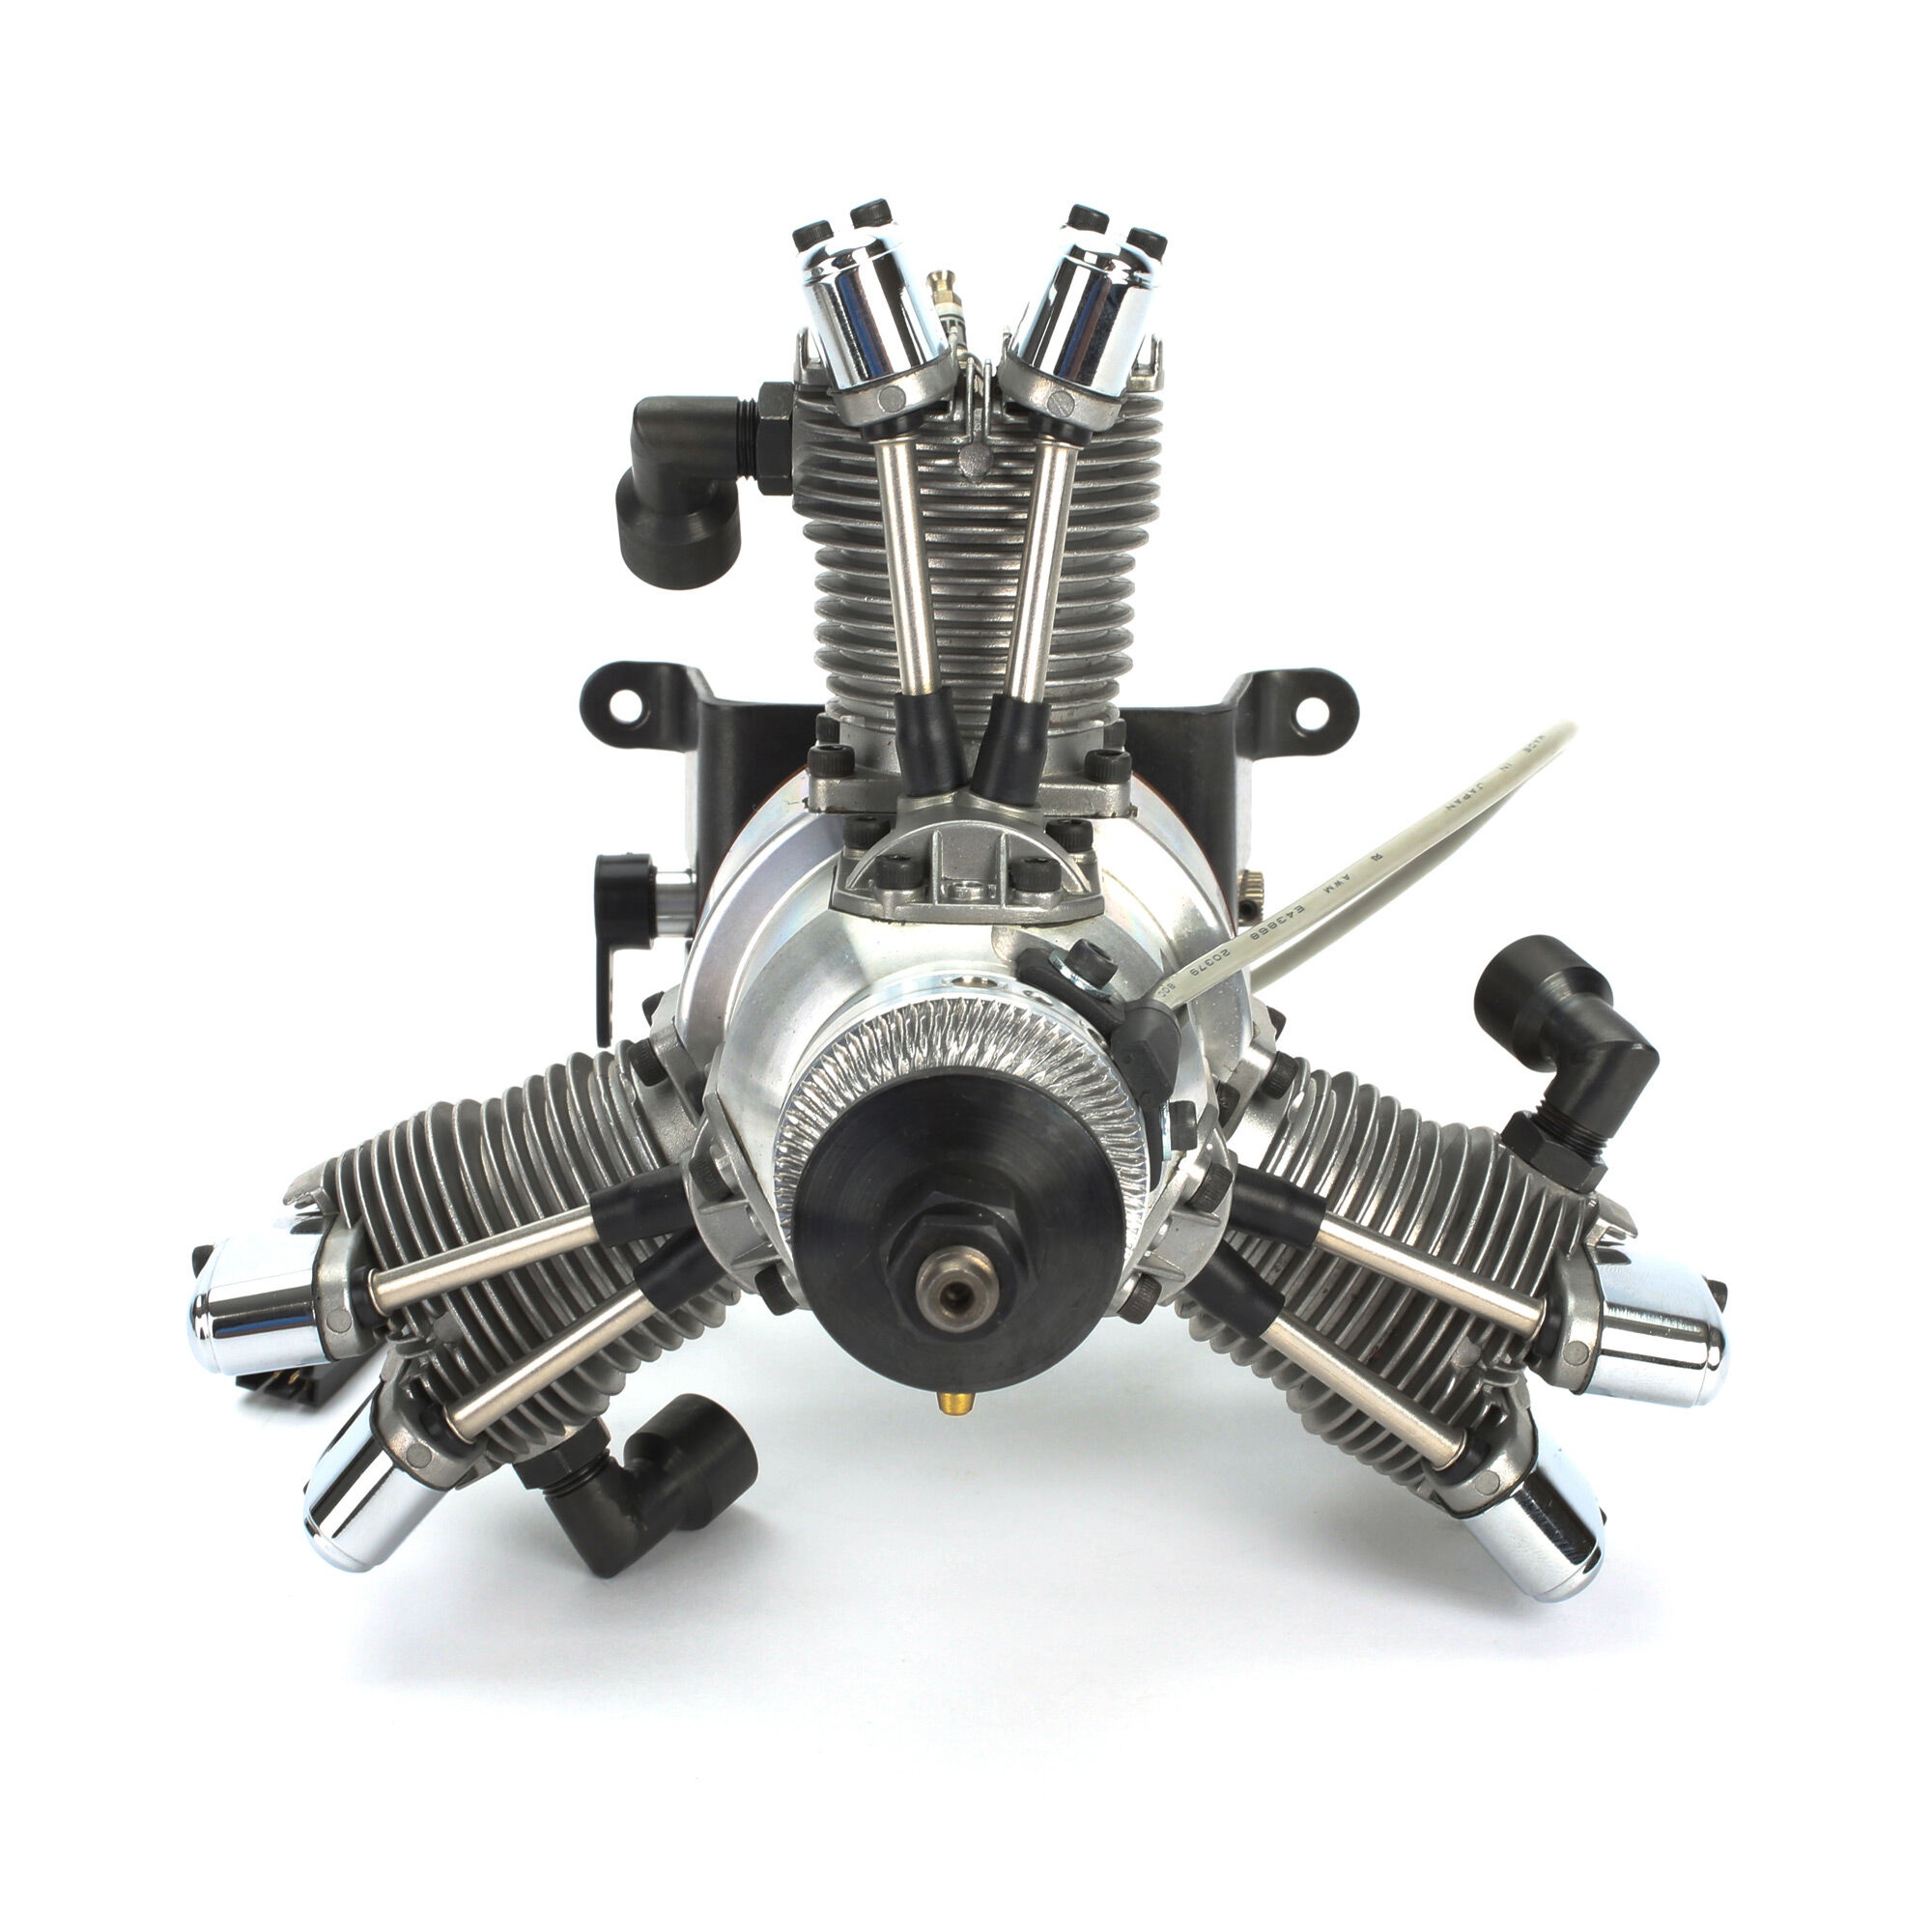 Saito FG-33R3 3-Cylinder Gasoline Radial Engine exclusively for model airplanes 